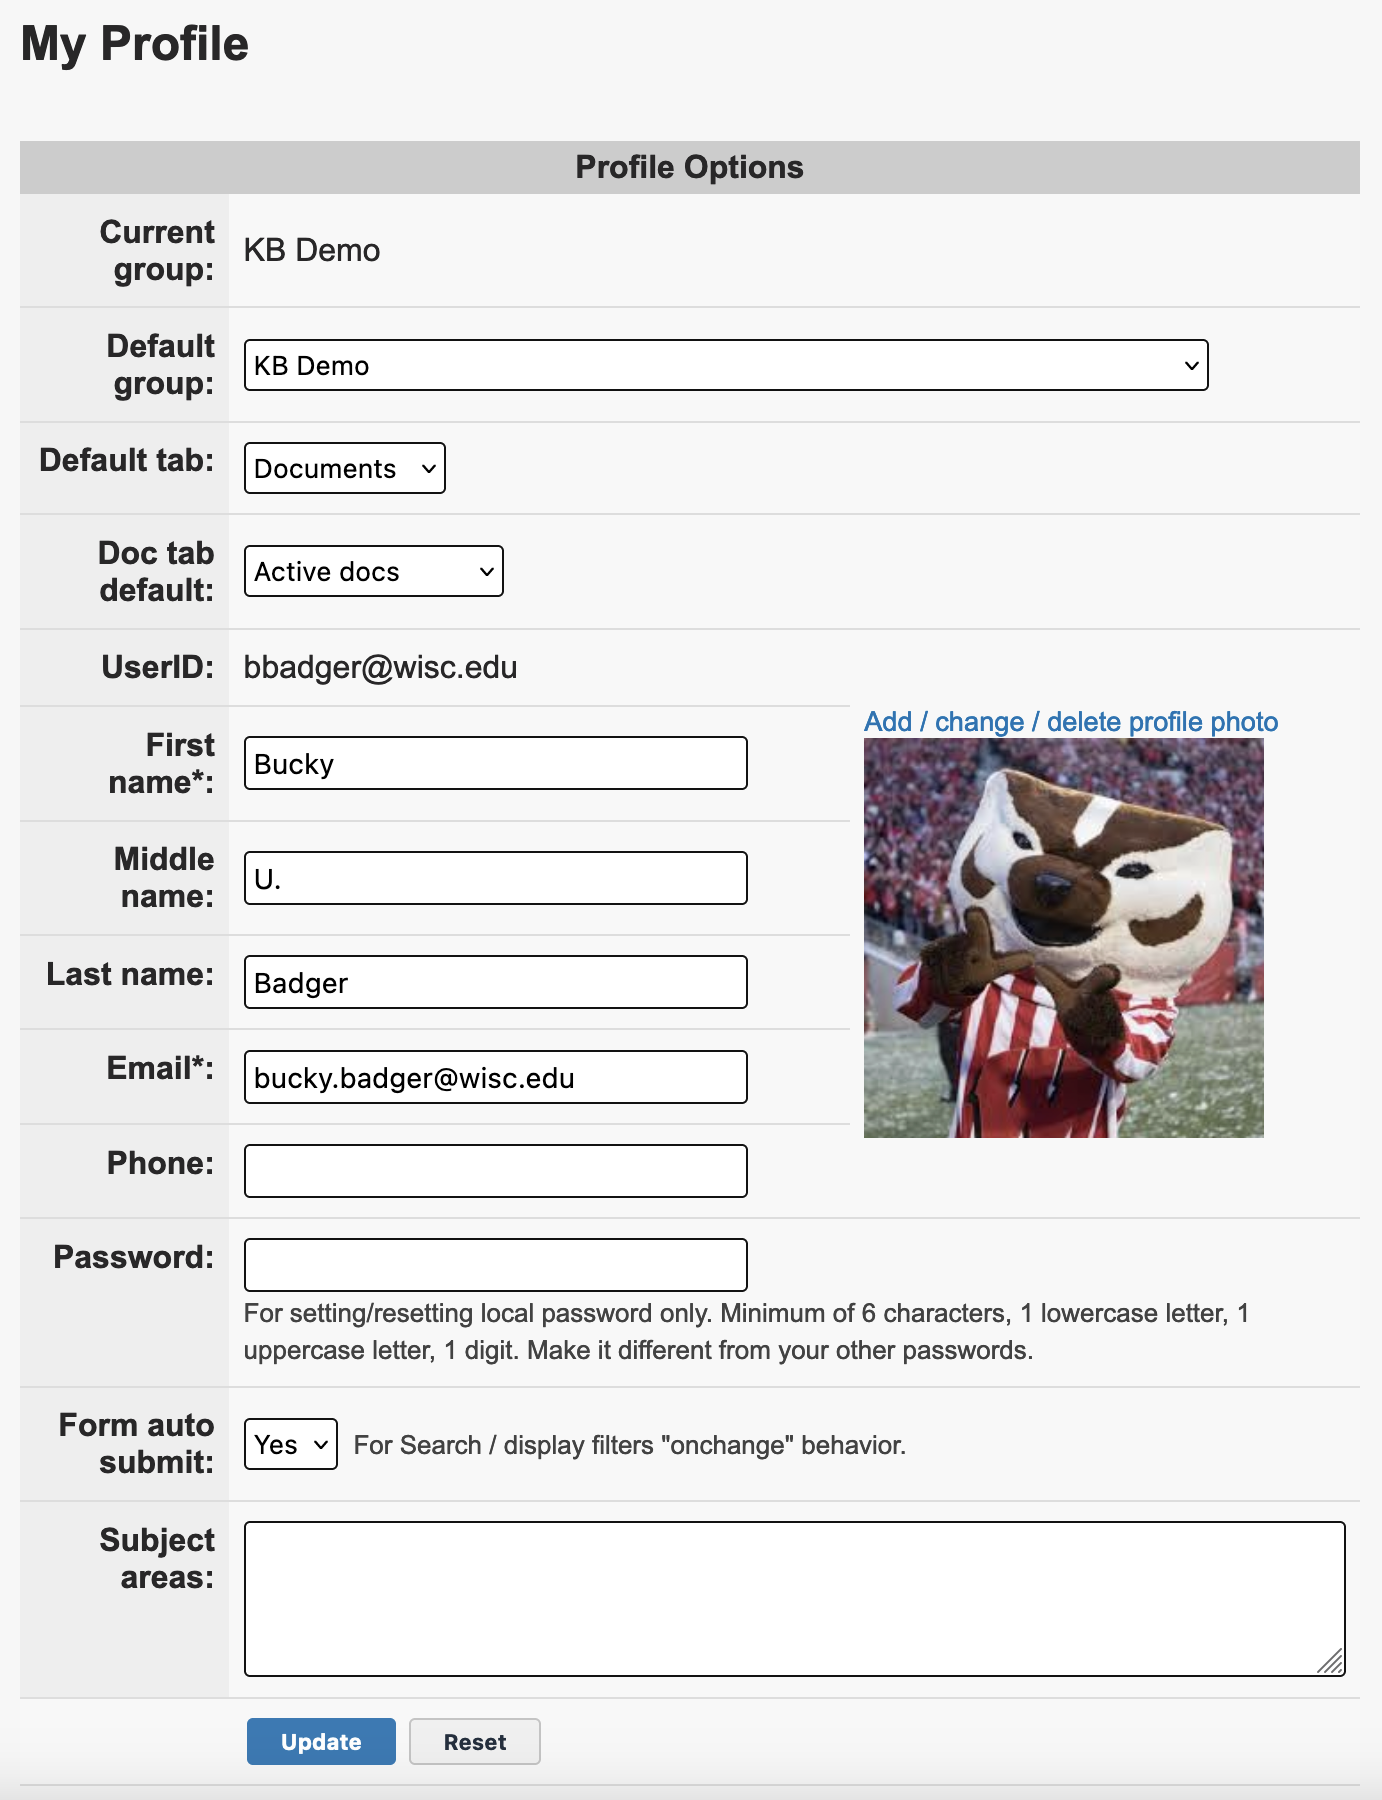 Example of the profile page for Bucky Badger using settings described below.